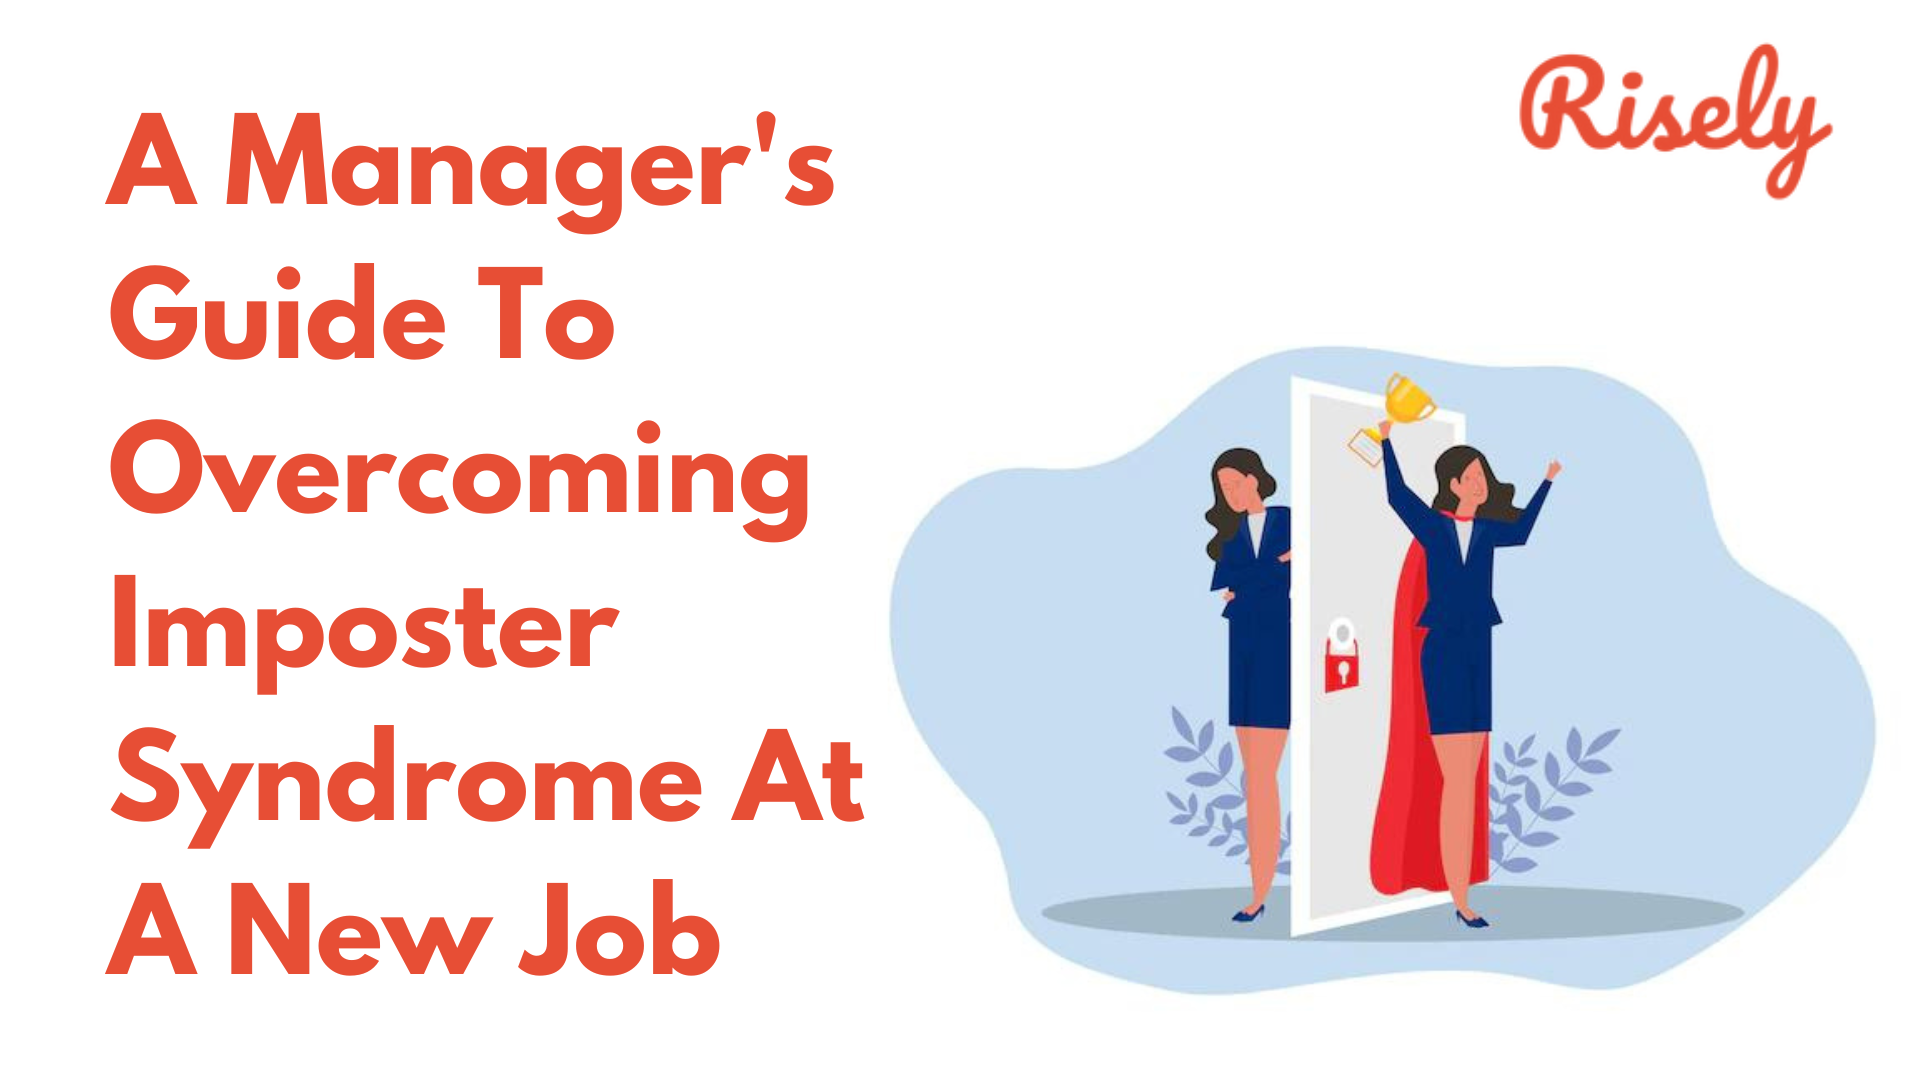  A Manager’s Guide To Overcoming Imposter Syndrome At A New Job